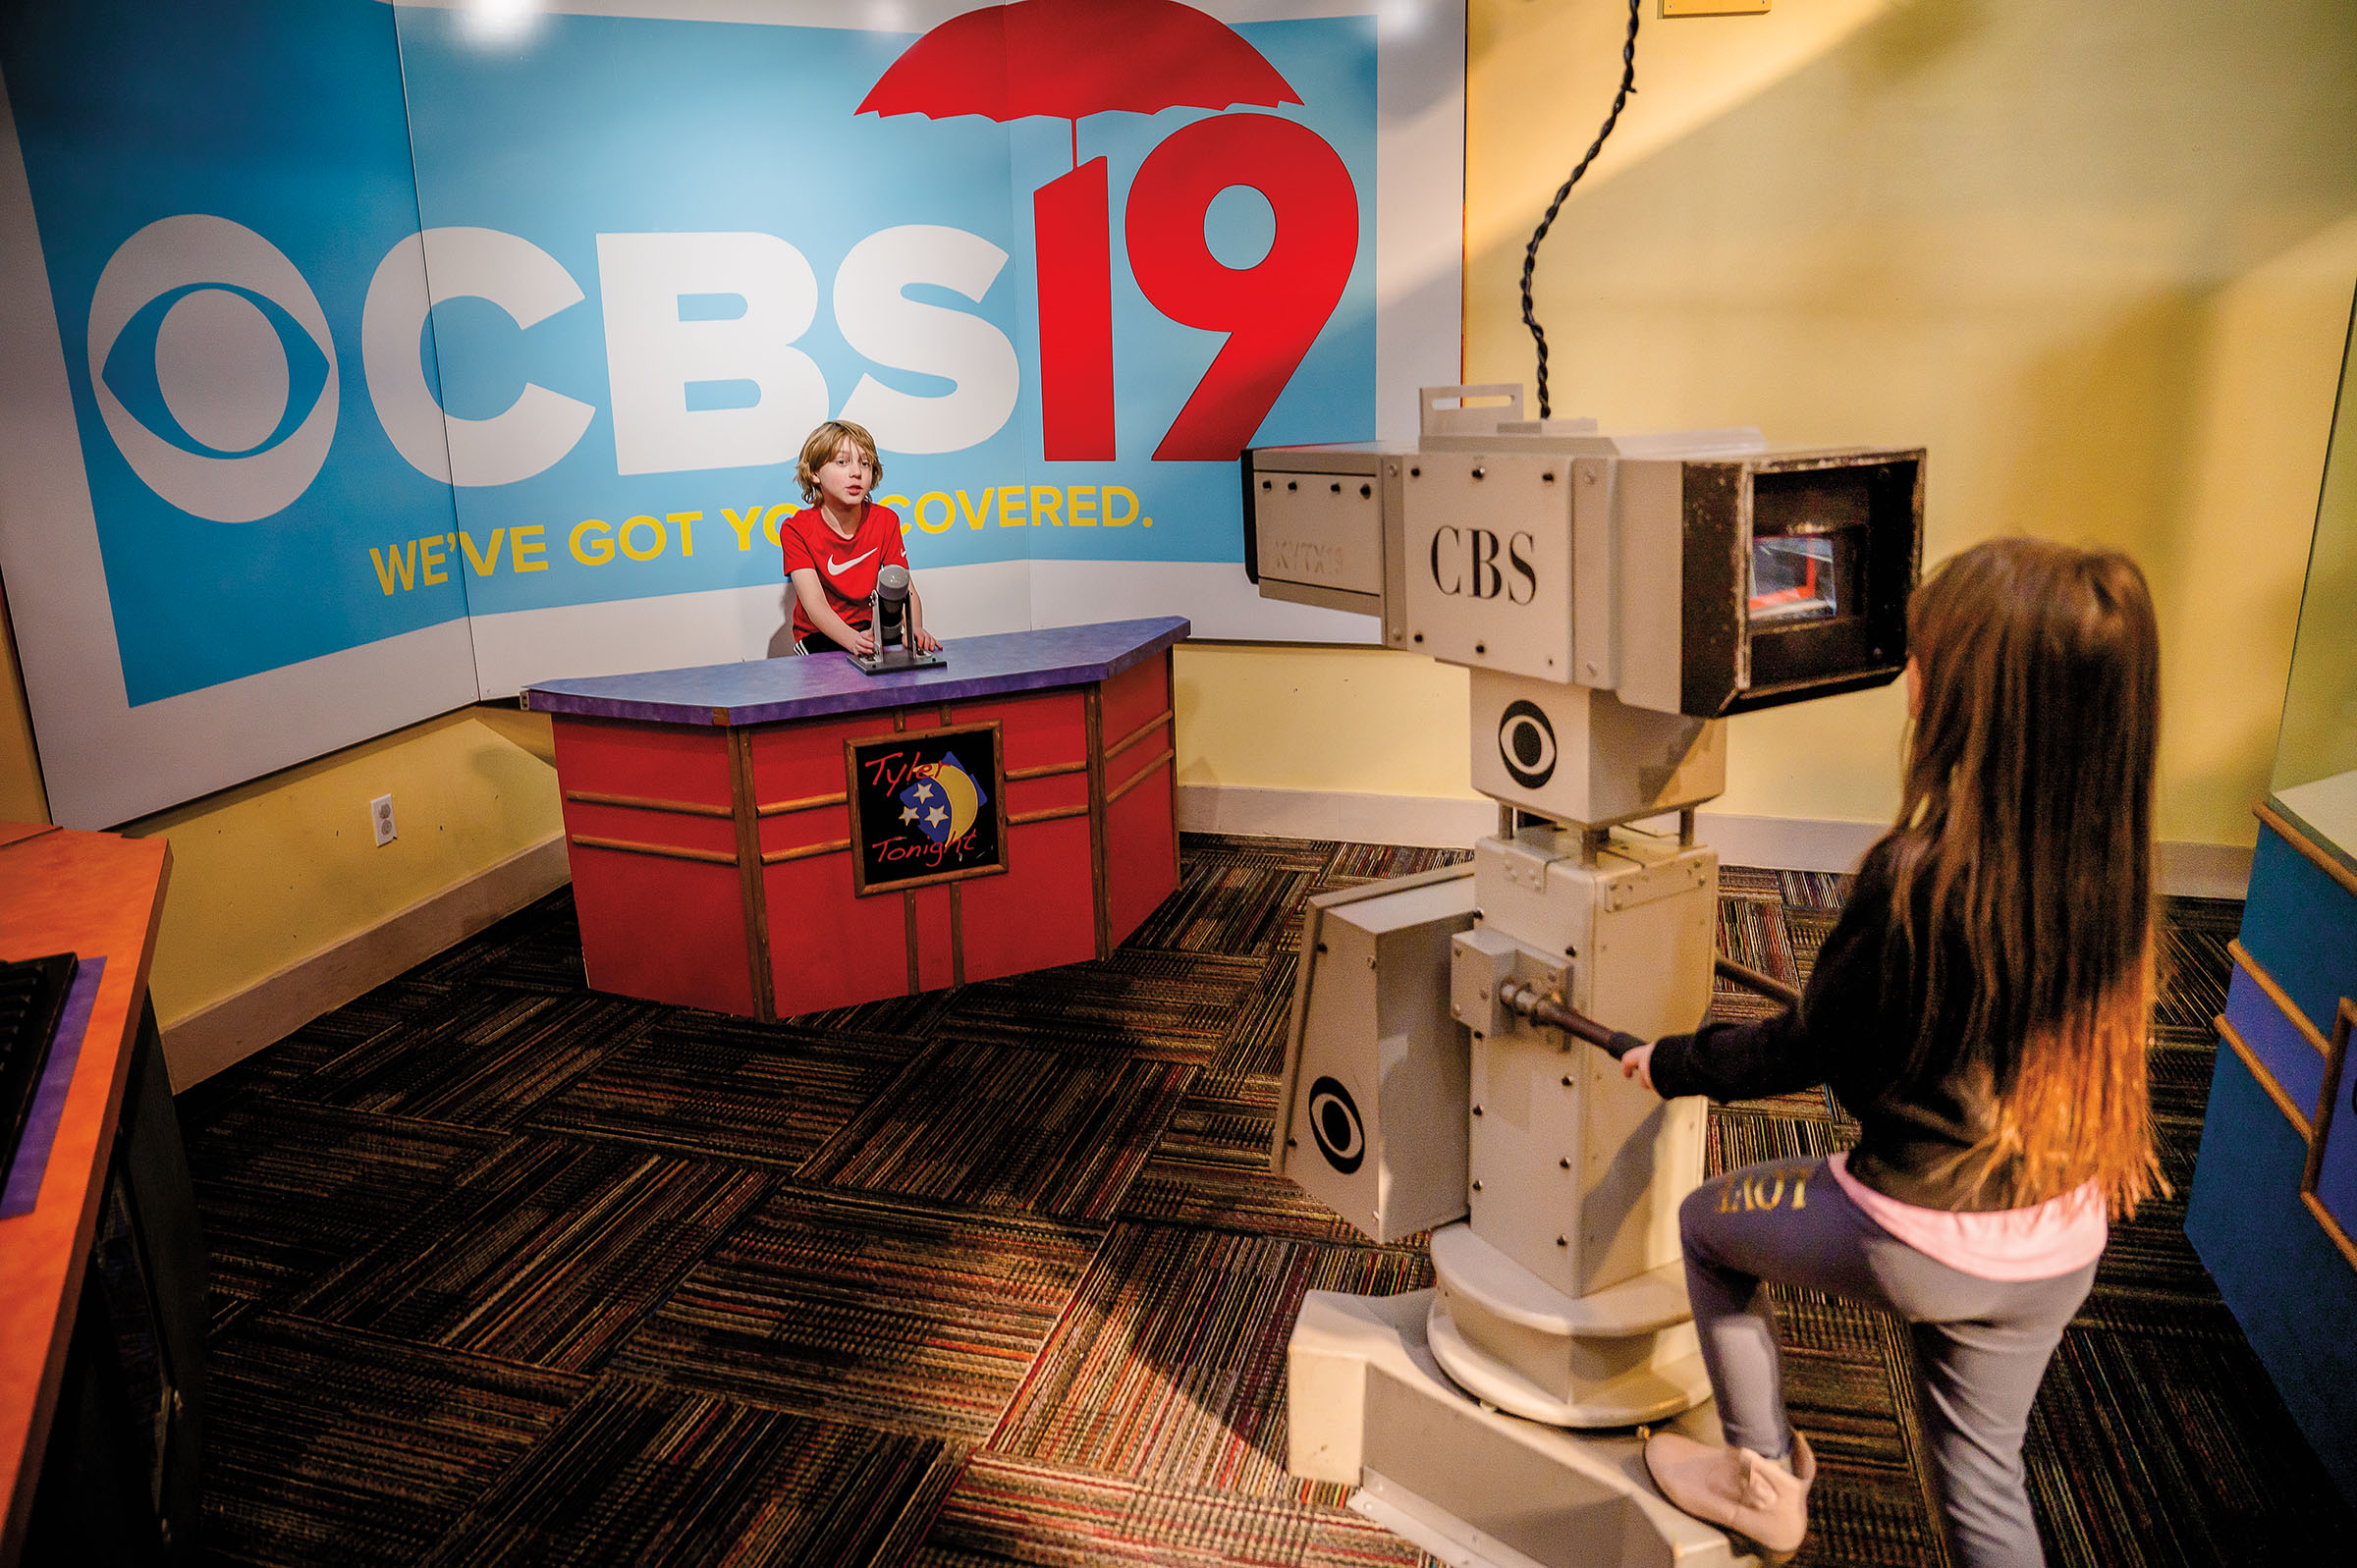 Two young people use a replica TV set including a large news camera, desk, and background reading 